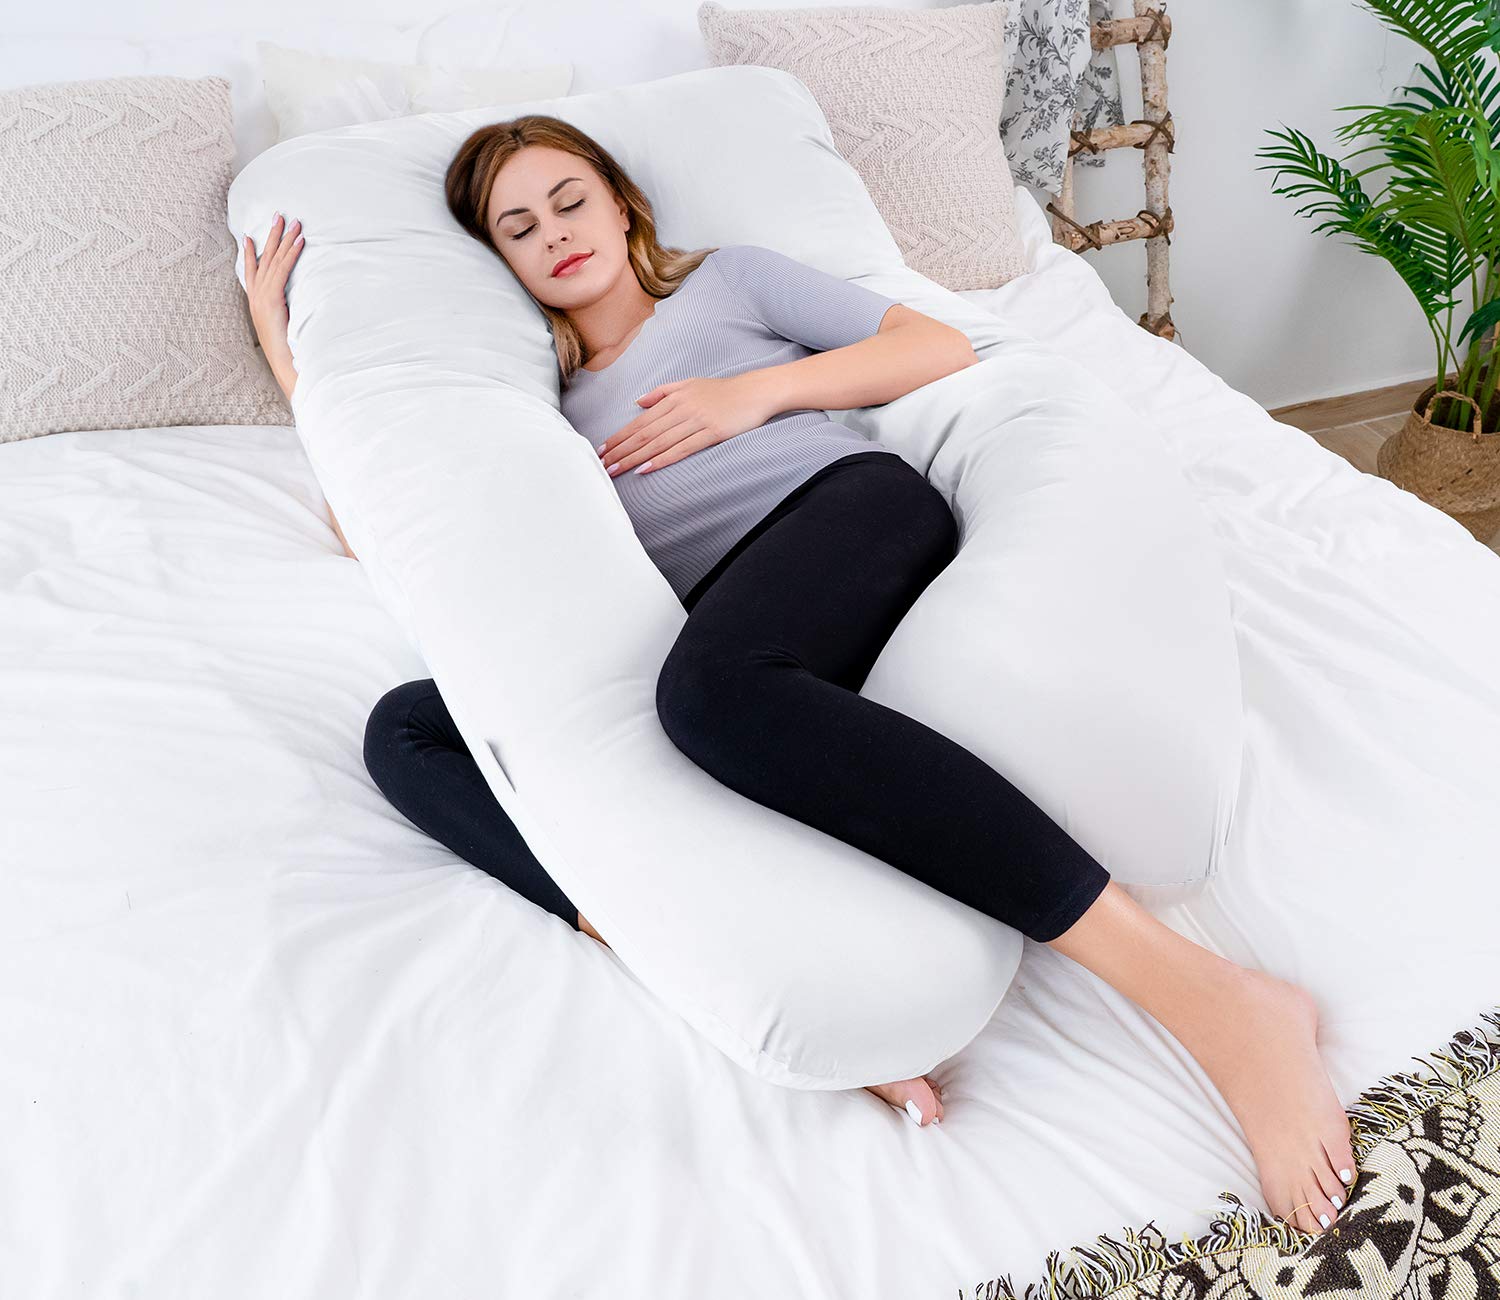 Top 10 Best Ushaped Maternity Body Pillow in 2021